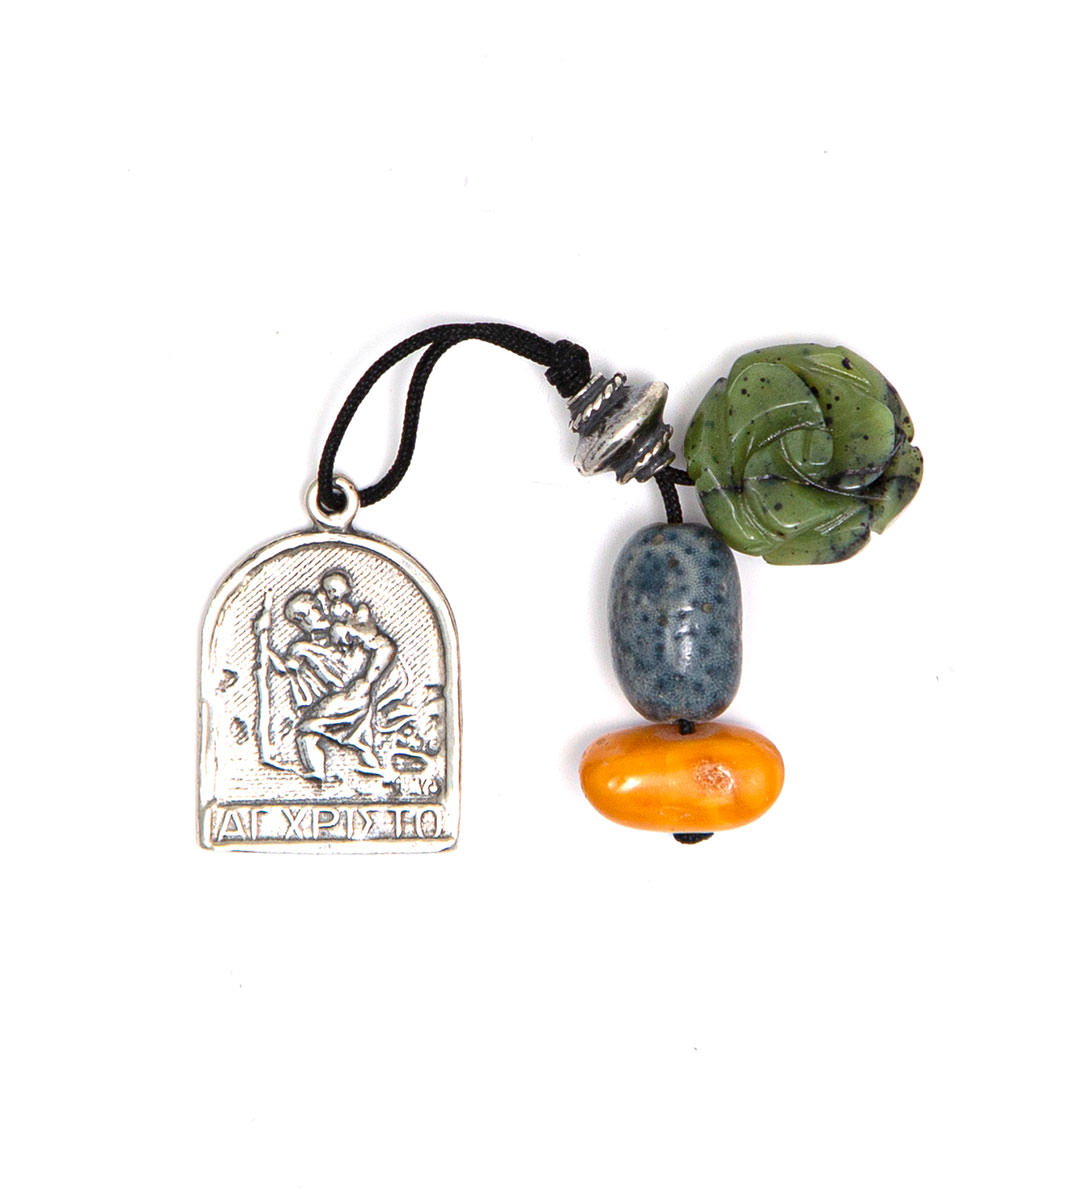 Saint Christopher : For Safe Travels. Amulet with semi precious stones: Green Agate, Blue Coral, Genuine Amber from Baltic Sea, and Silver